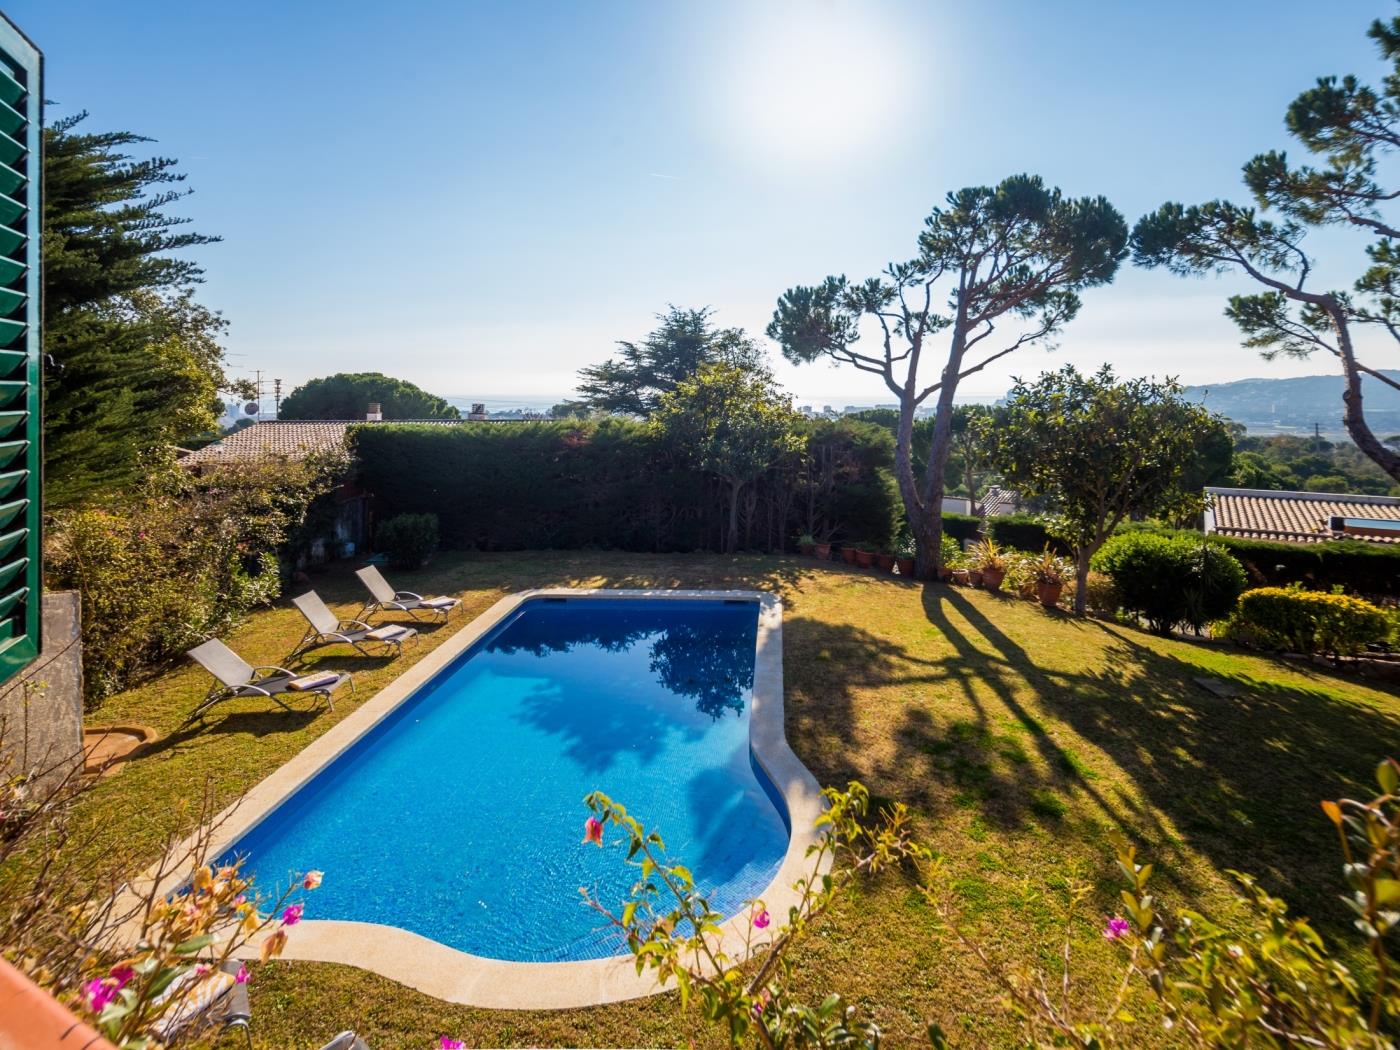 Villa Boreal spacious house with private pool, garden and sea views in Calonge